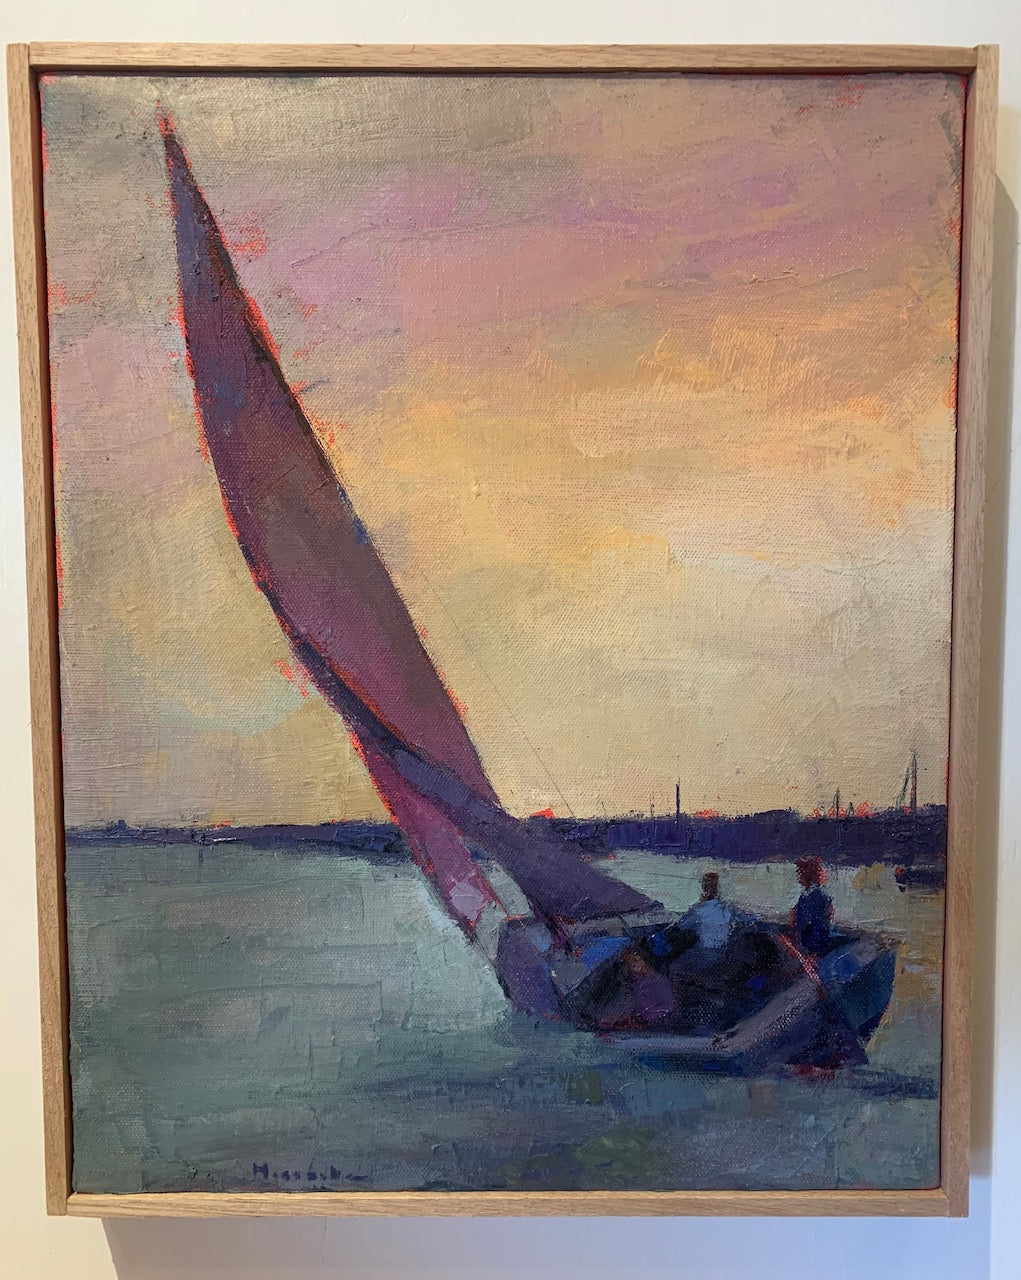 Oil painting by Larry Horowitz of a sailboat on the water with two people aboard against a pastel pink and yellow sky. There is a dock with many boats out in the distant.